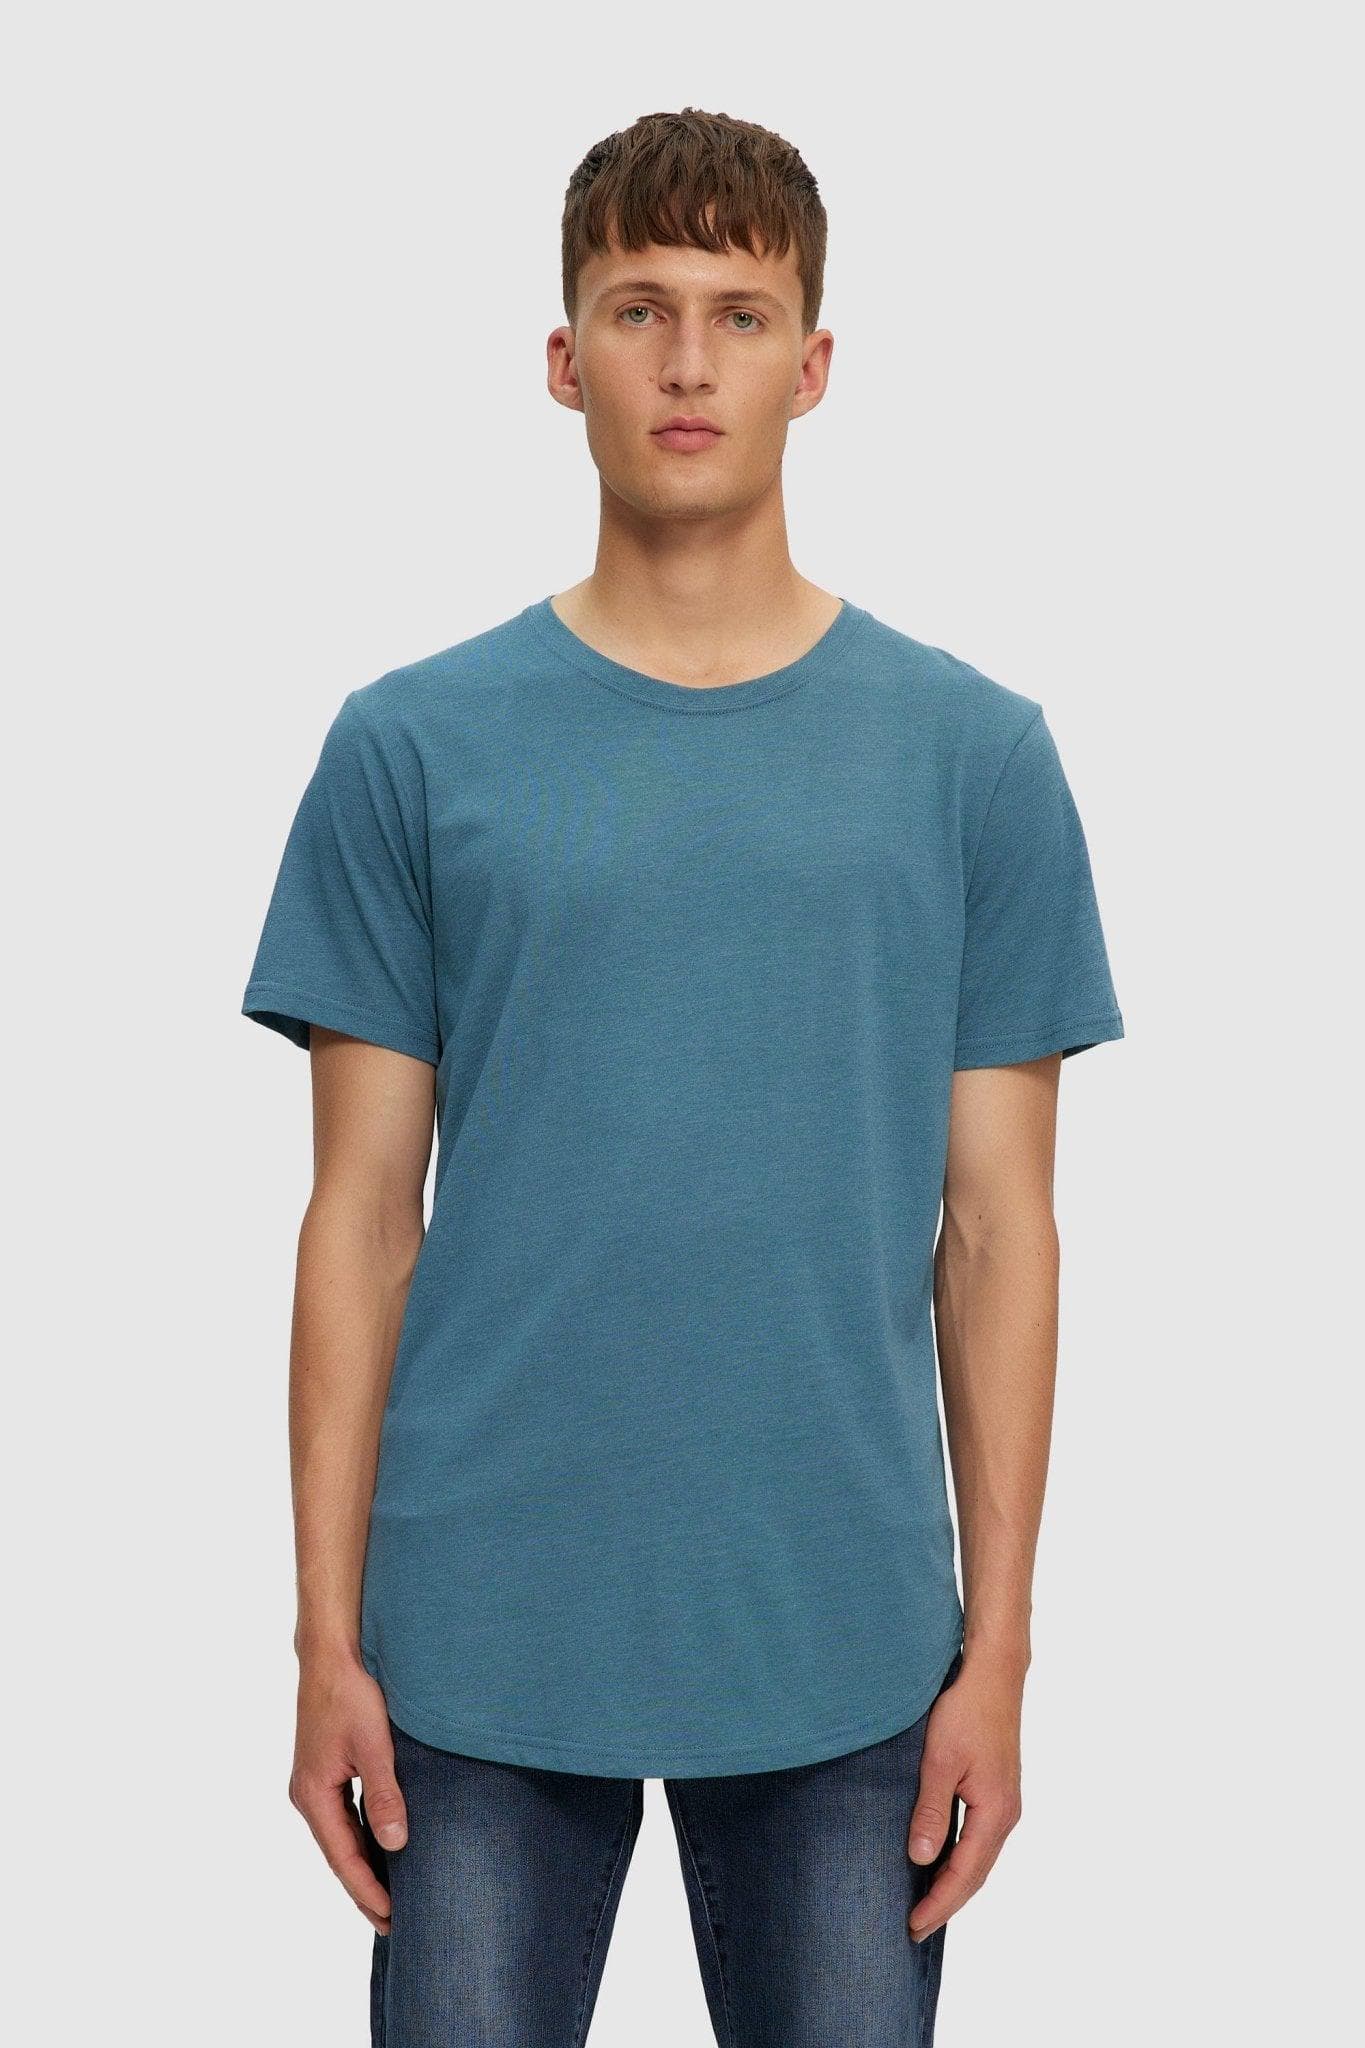 Buy Eazy Scoop Tee Men's Shirts from Kuwalla. Find Kuwalla fashion & more  at